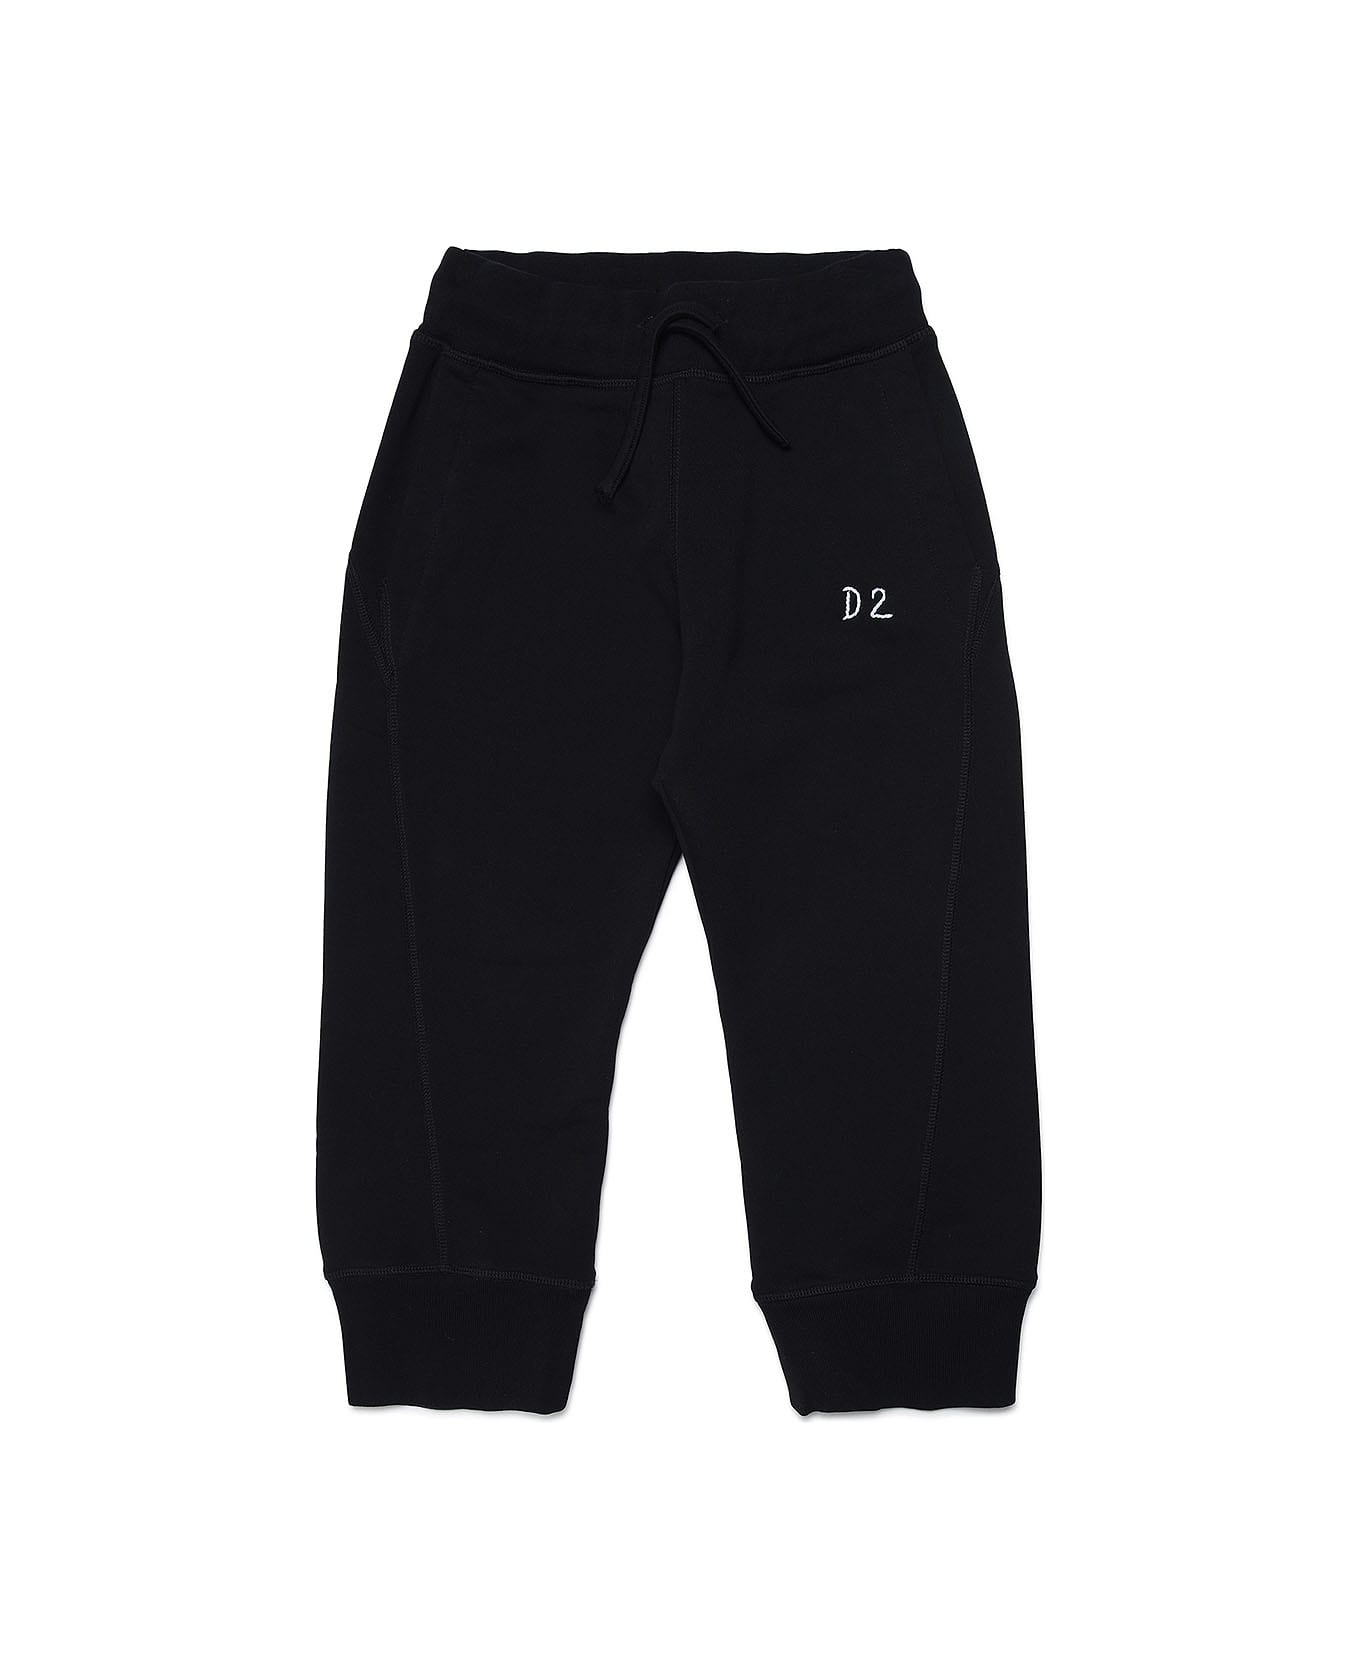 Dsquared2 Sport Trousers With Print - Black ボトムス